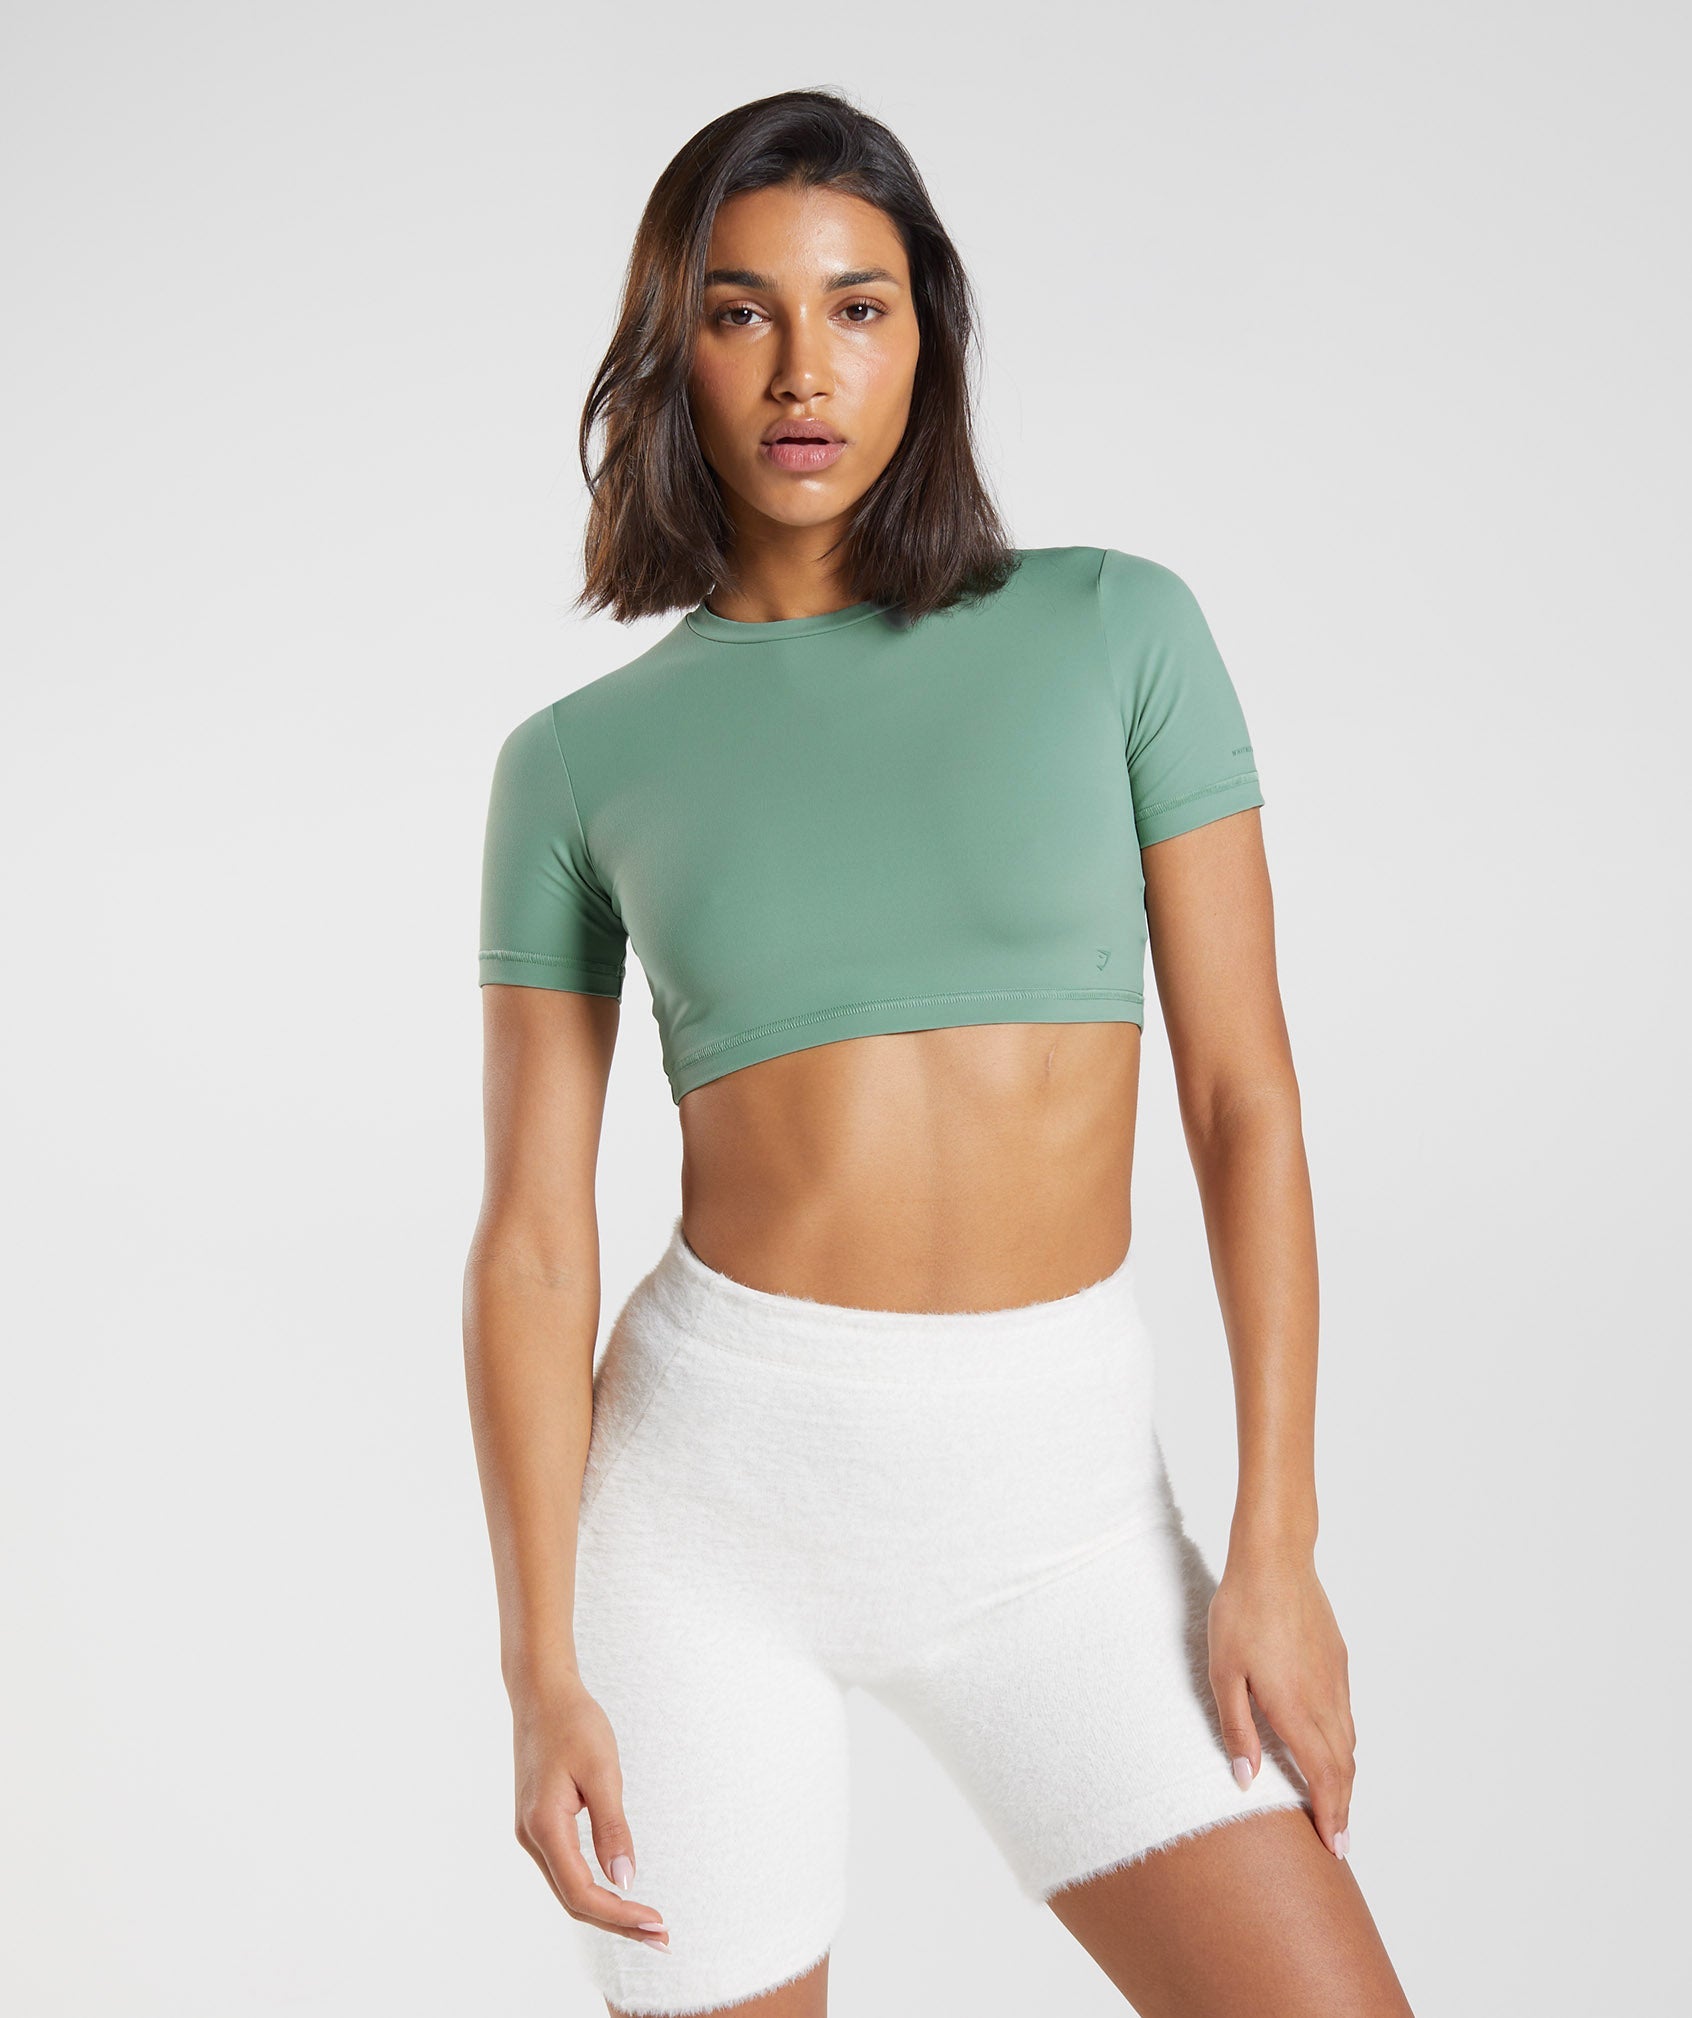 Gymshark x Whitney Simmons collection long sleeve V1 crop top size small